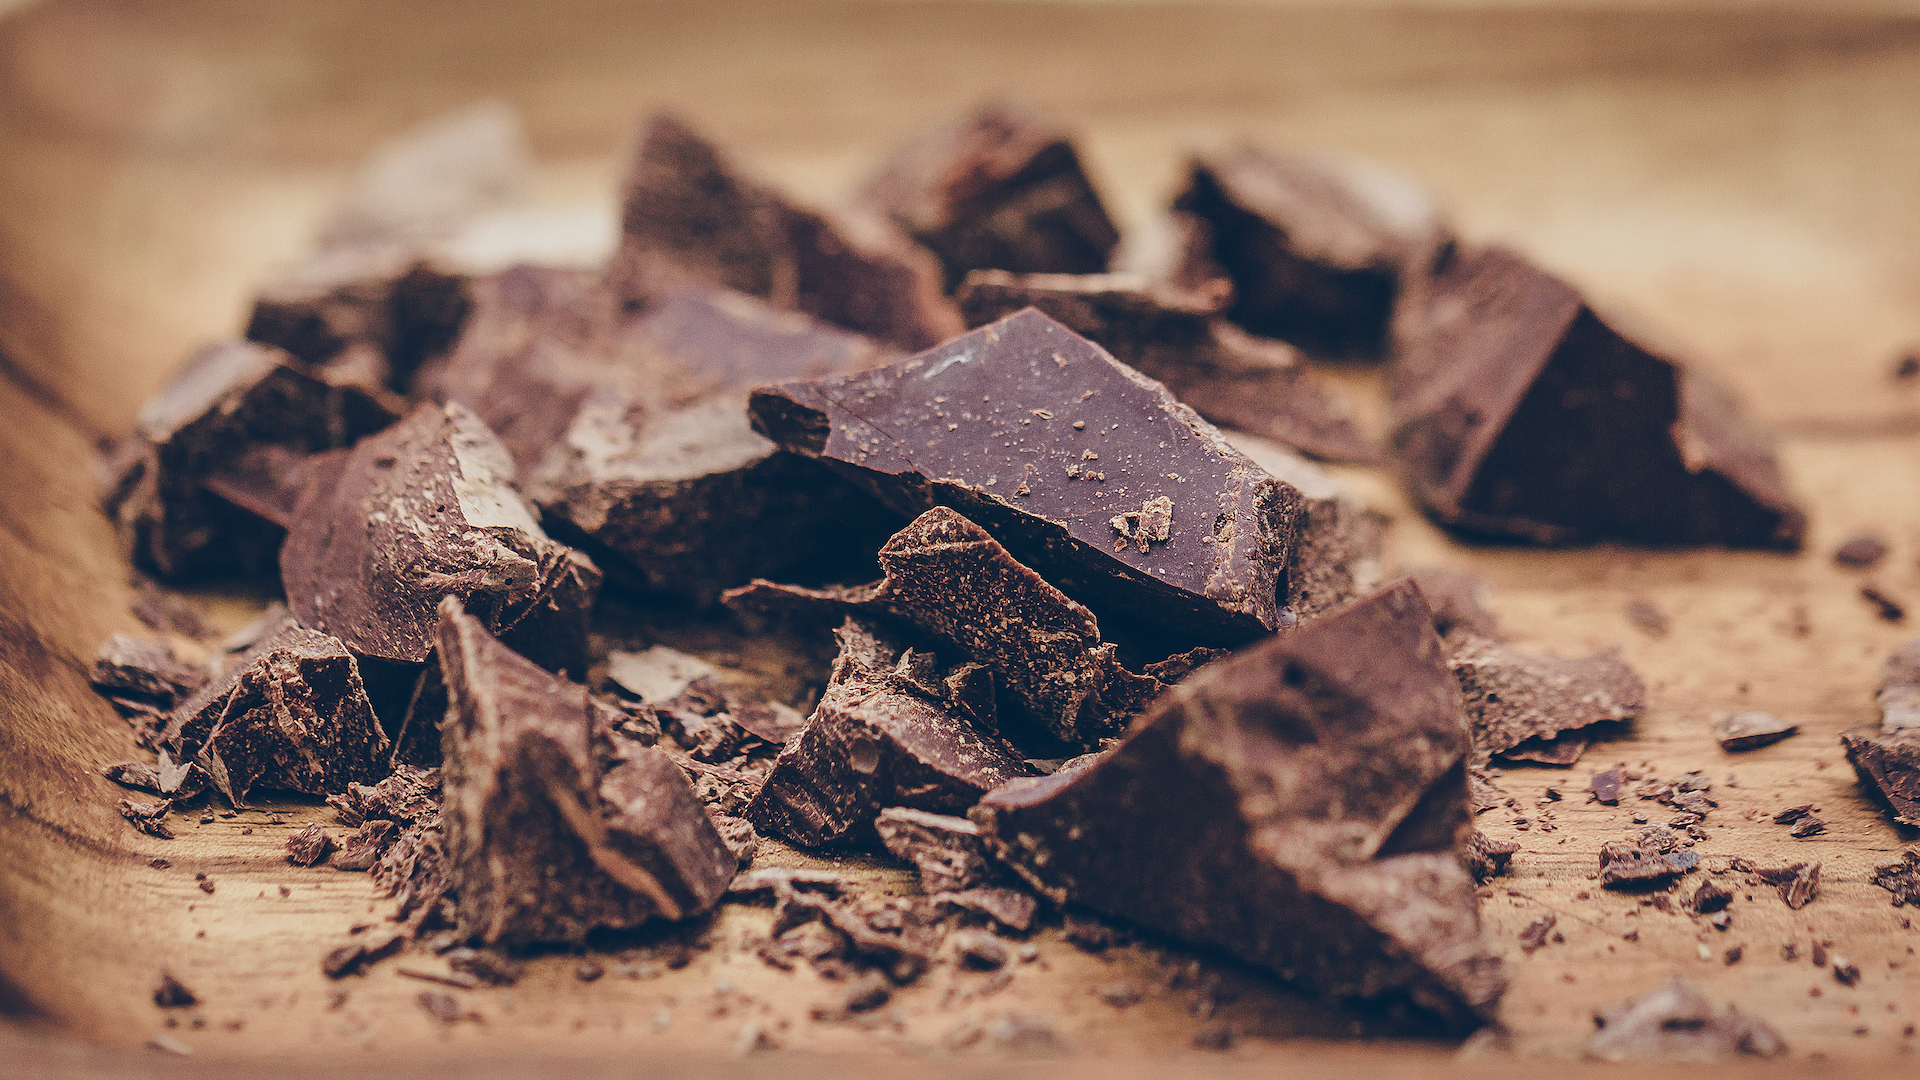 Chocolate Making Tips - Choose the perfect chocolate for your project.